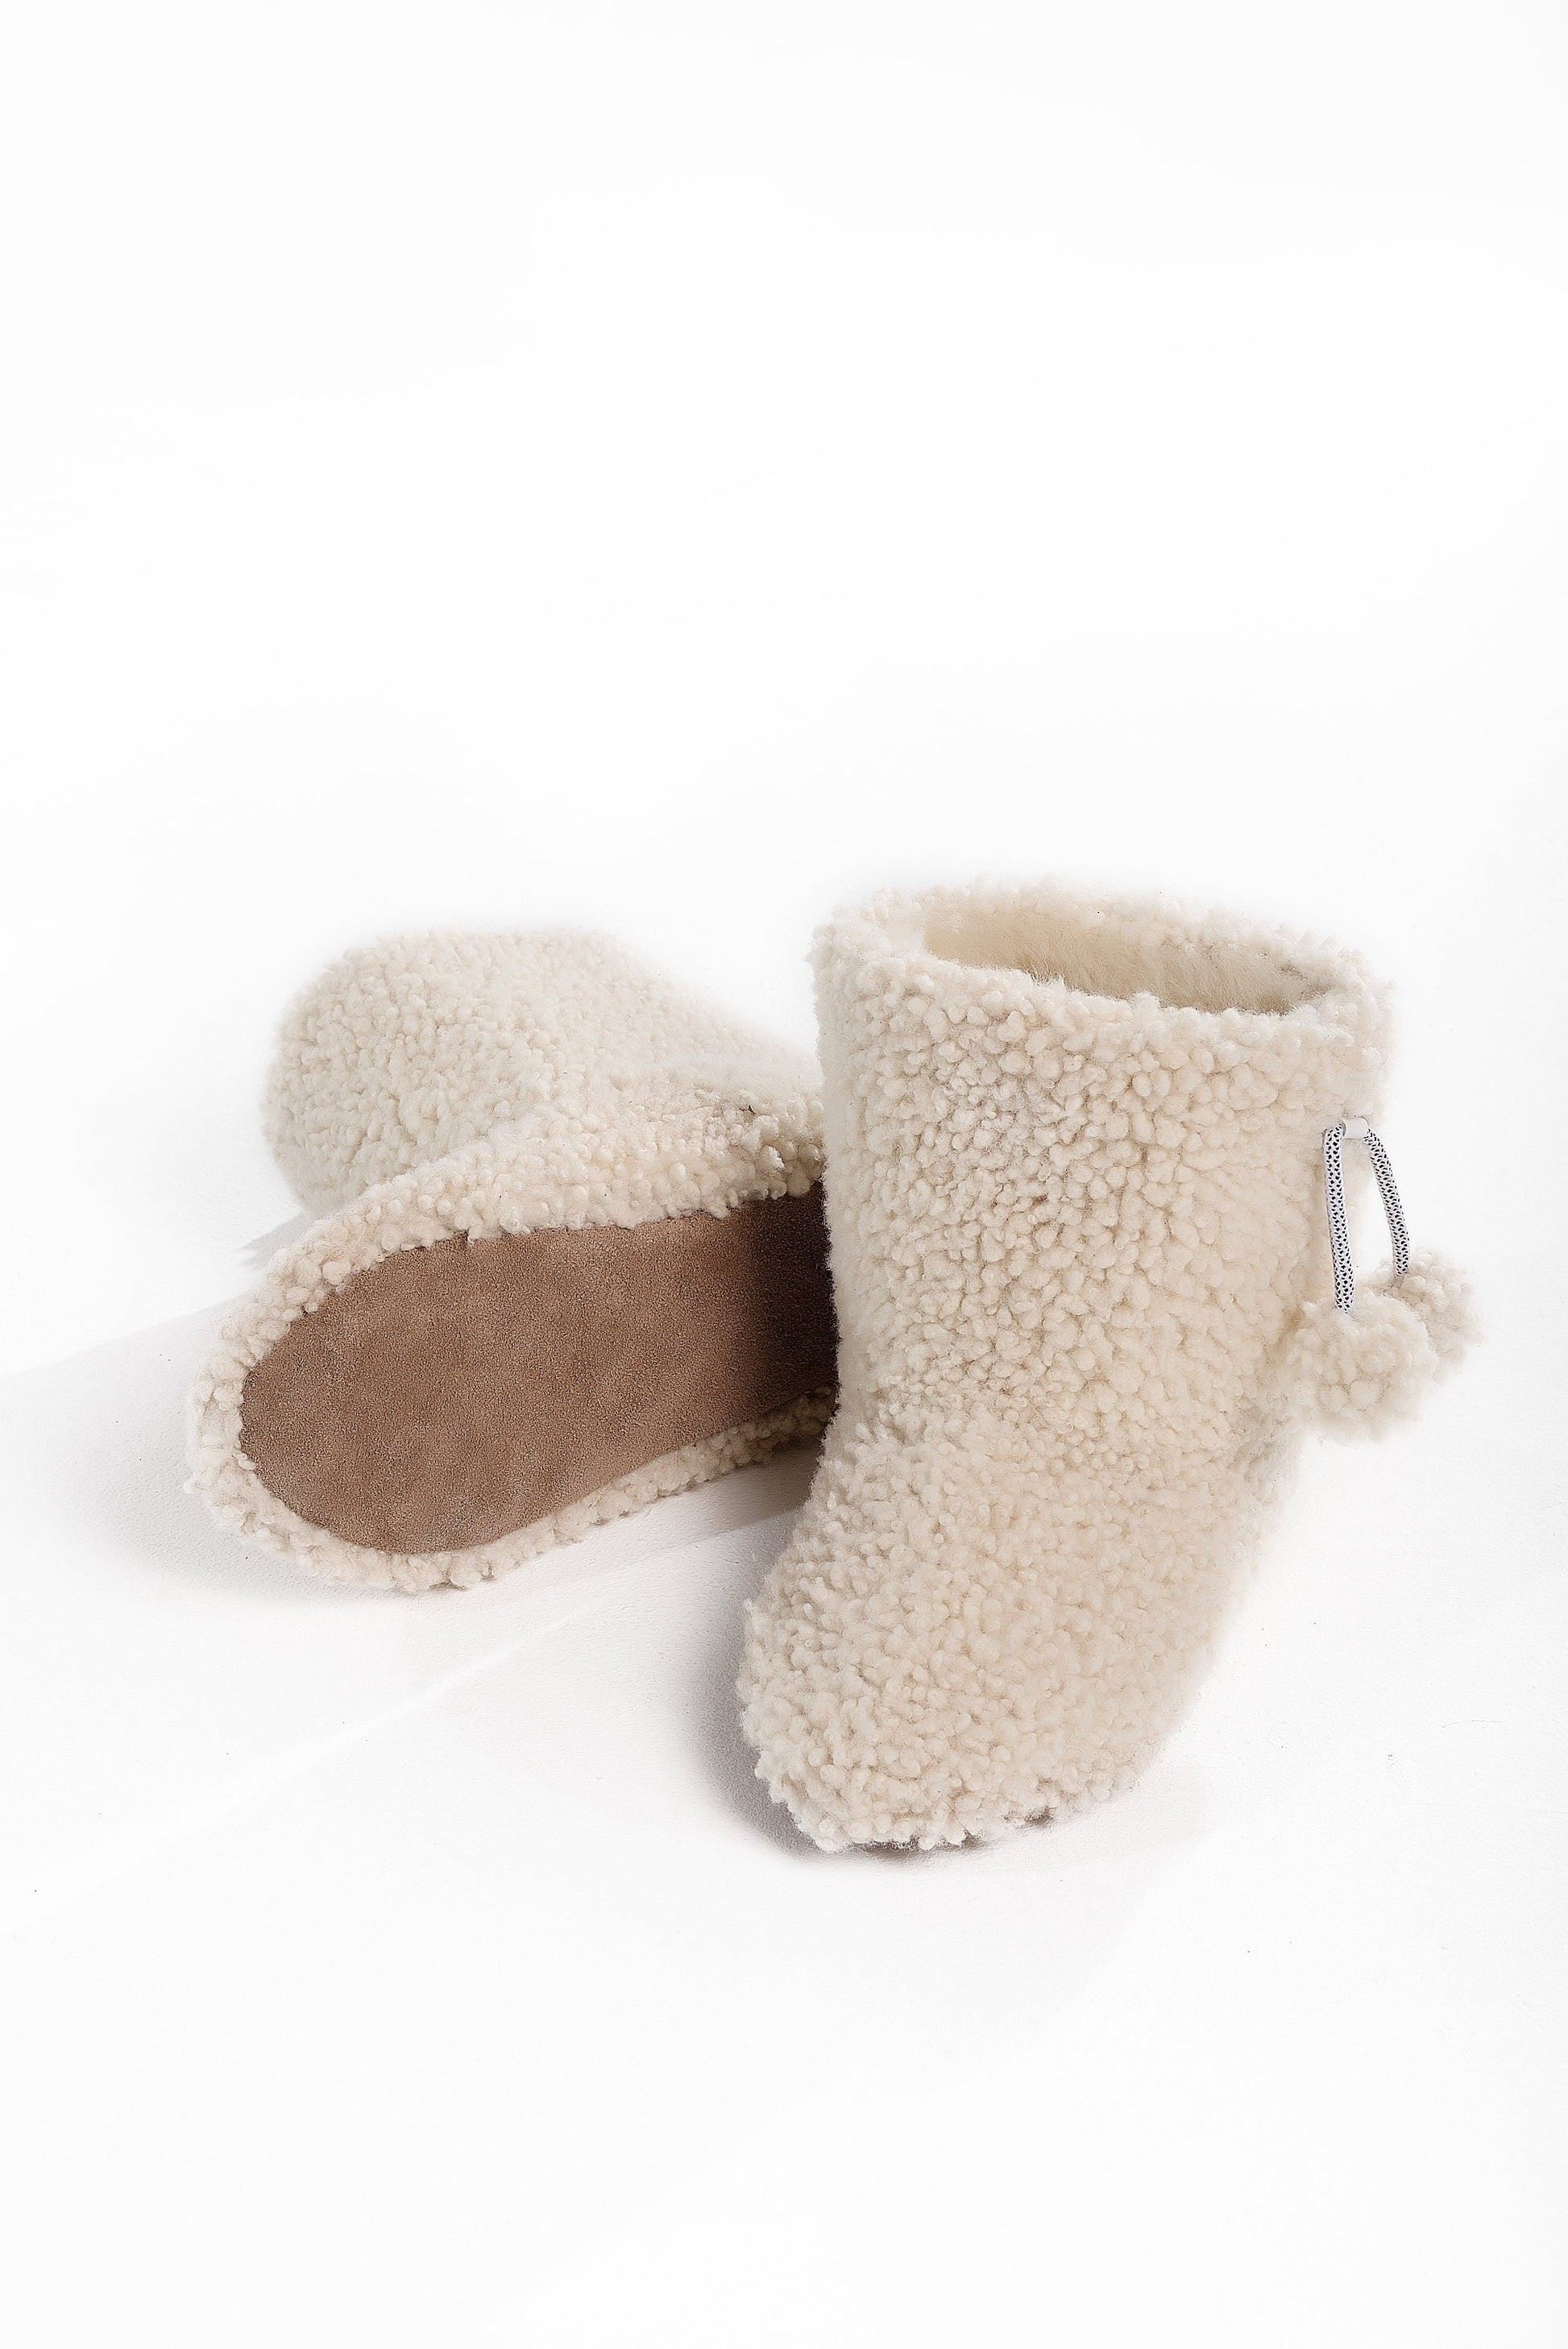 Real Womens Boucle Sheepskin Slipper Home Boots in White Color With Pom Pom